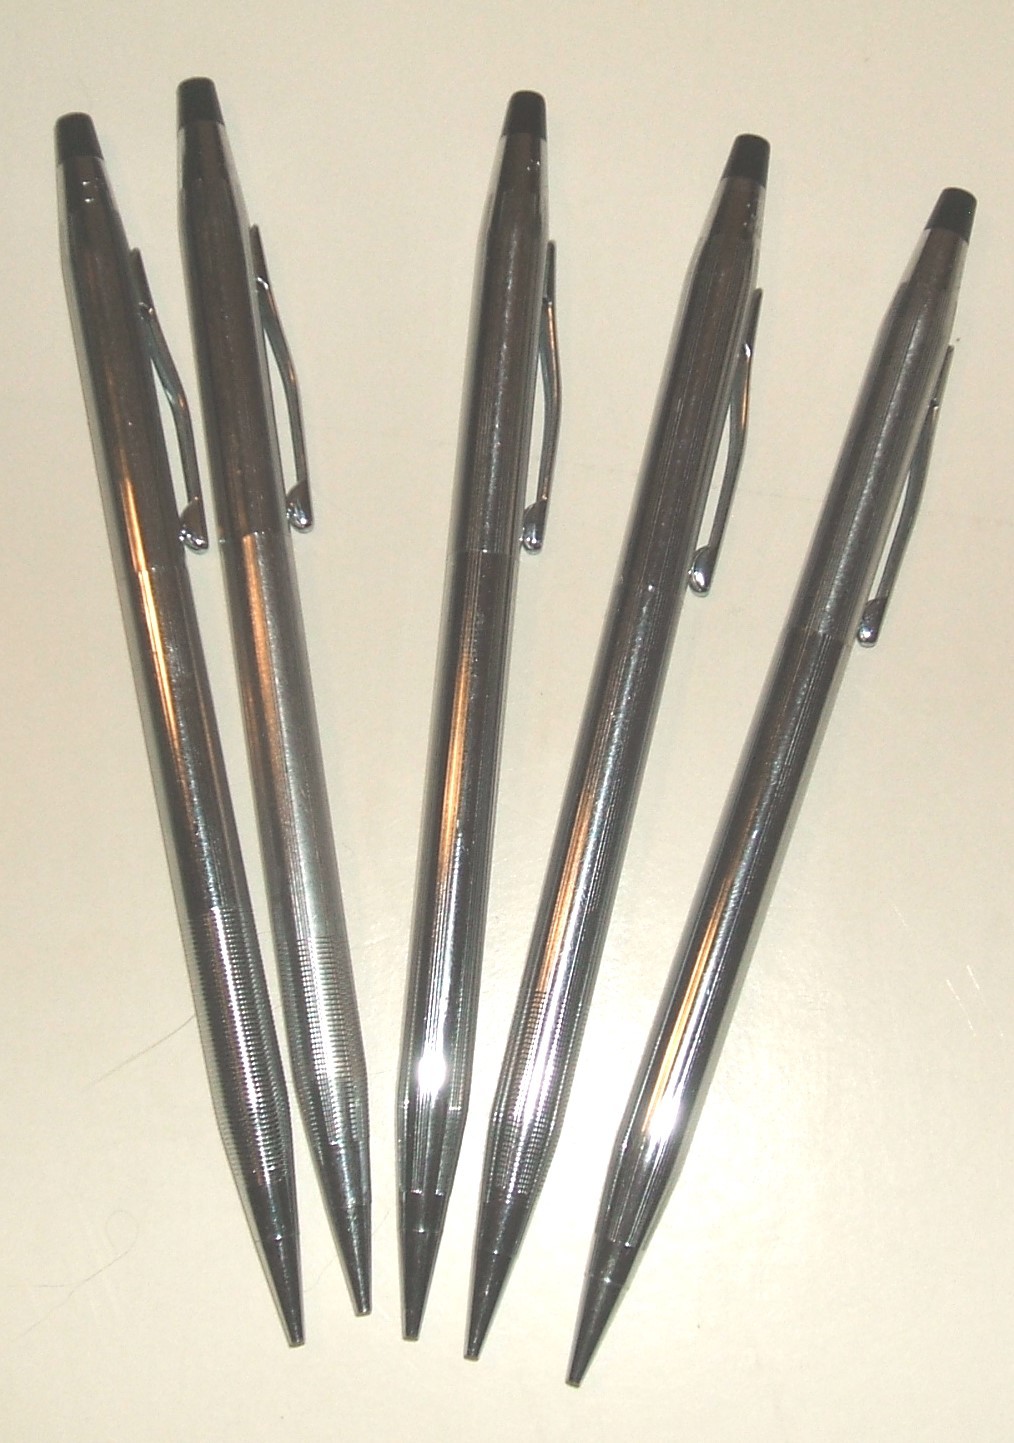 Cross chrome lot of five (5) mechanical pencils all work; all with erasers - $45.00